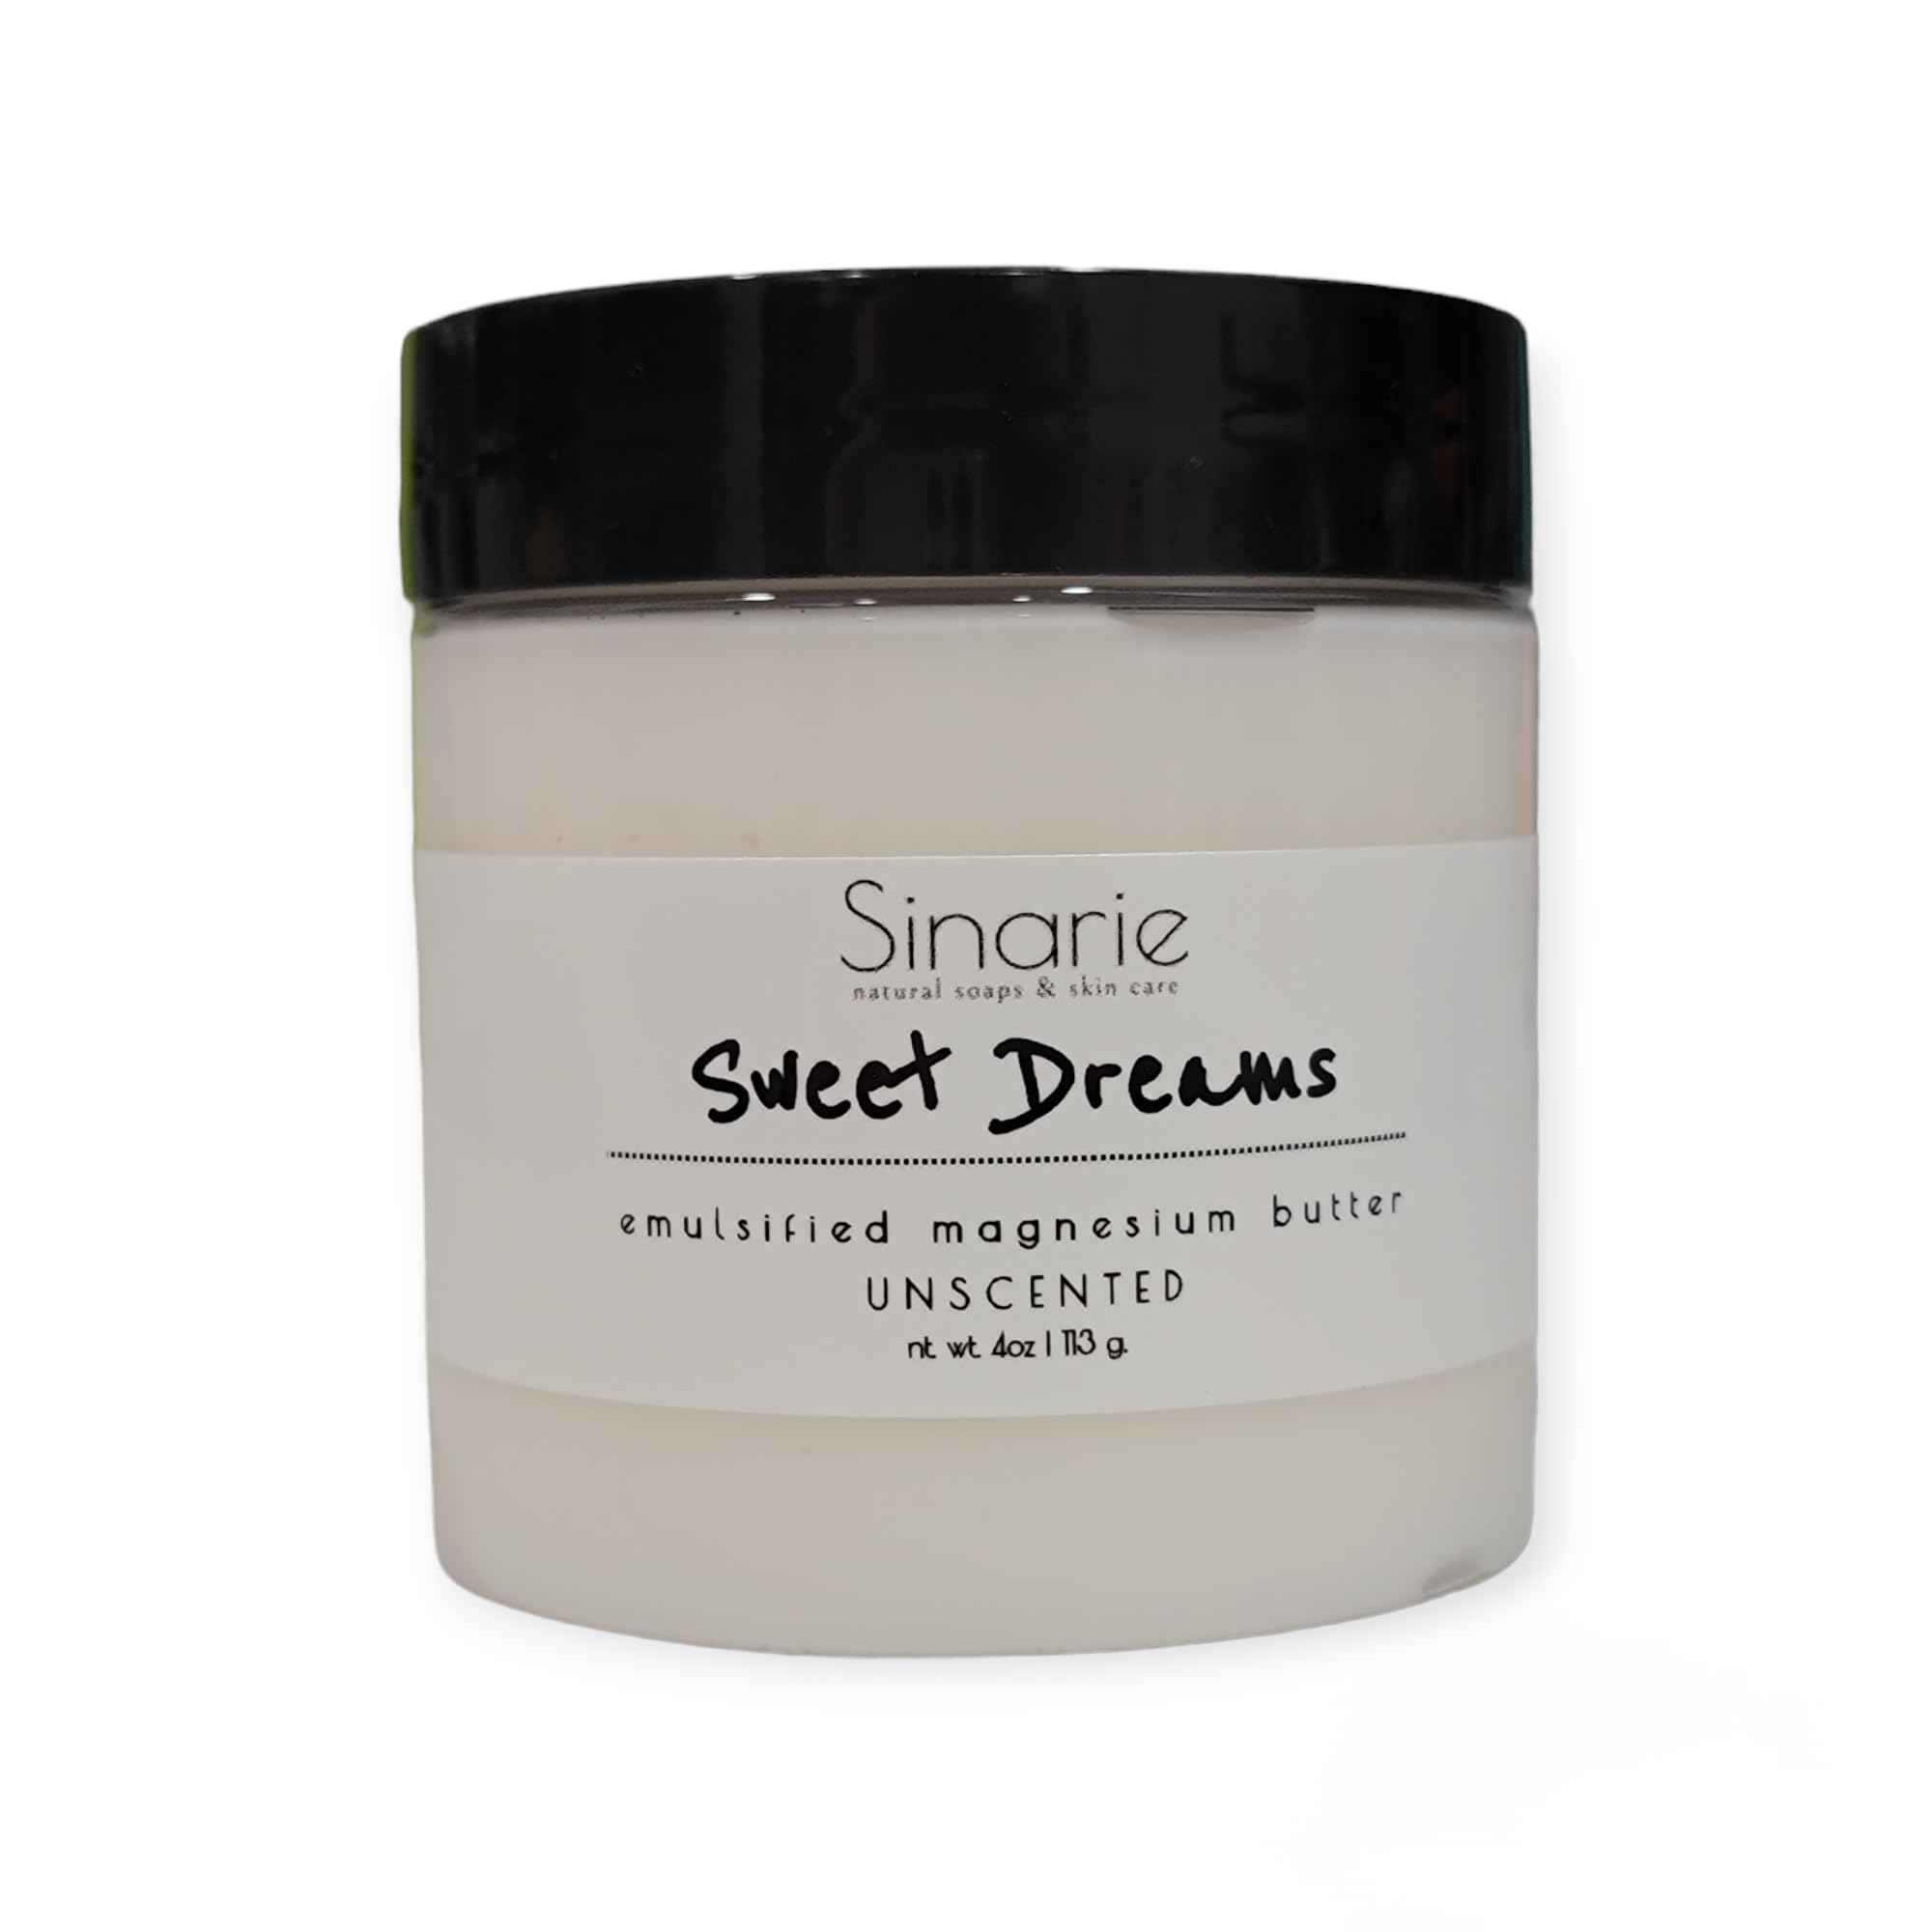 Sweet Dreams Magnesium Emulsified Body Butter, 4 oz., 1 Count | Mango Butter | Premium Magnesium Oil | Natural Ingredients | Magnesium Lotion